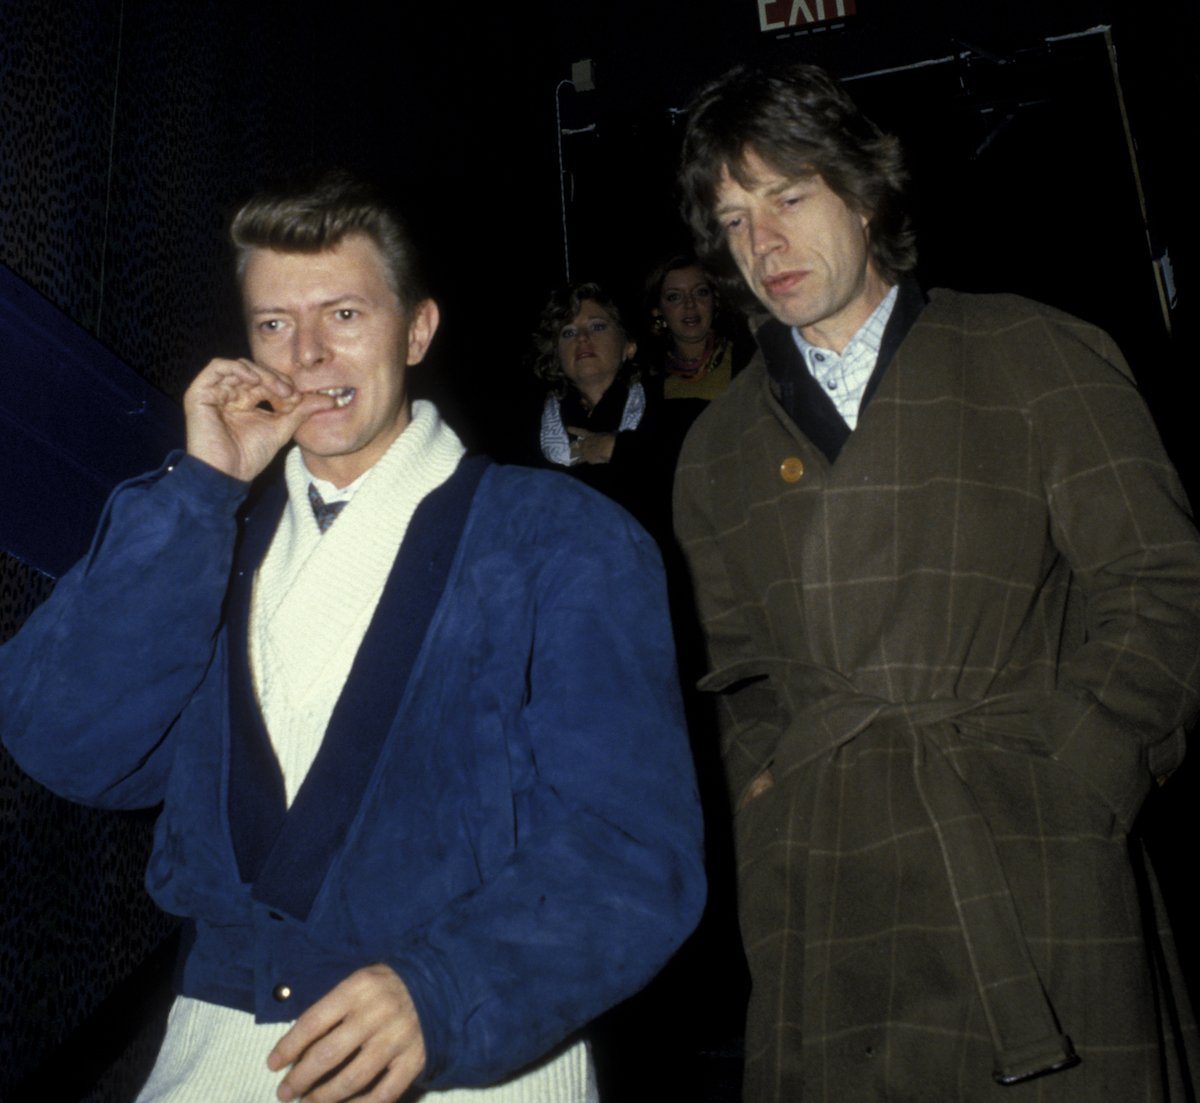 Musicians David Bowie and Mick Jagger walk by paparazzi in 1985